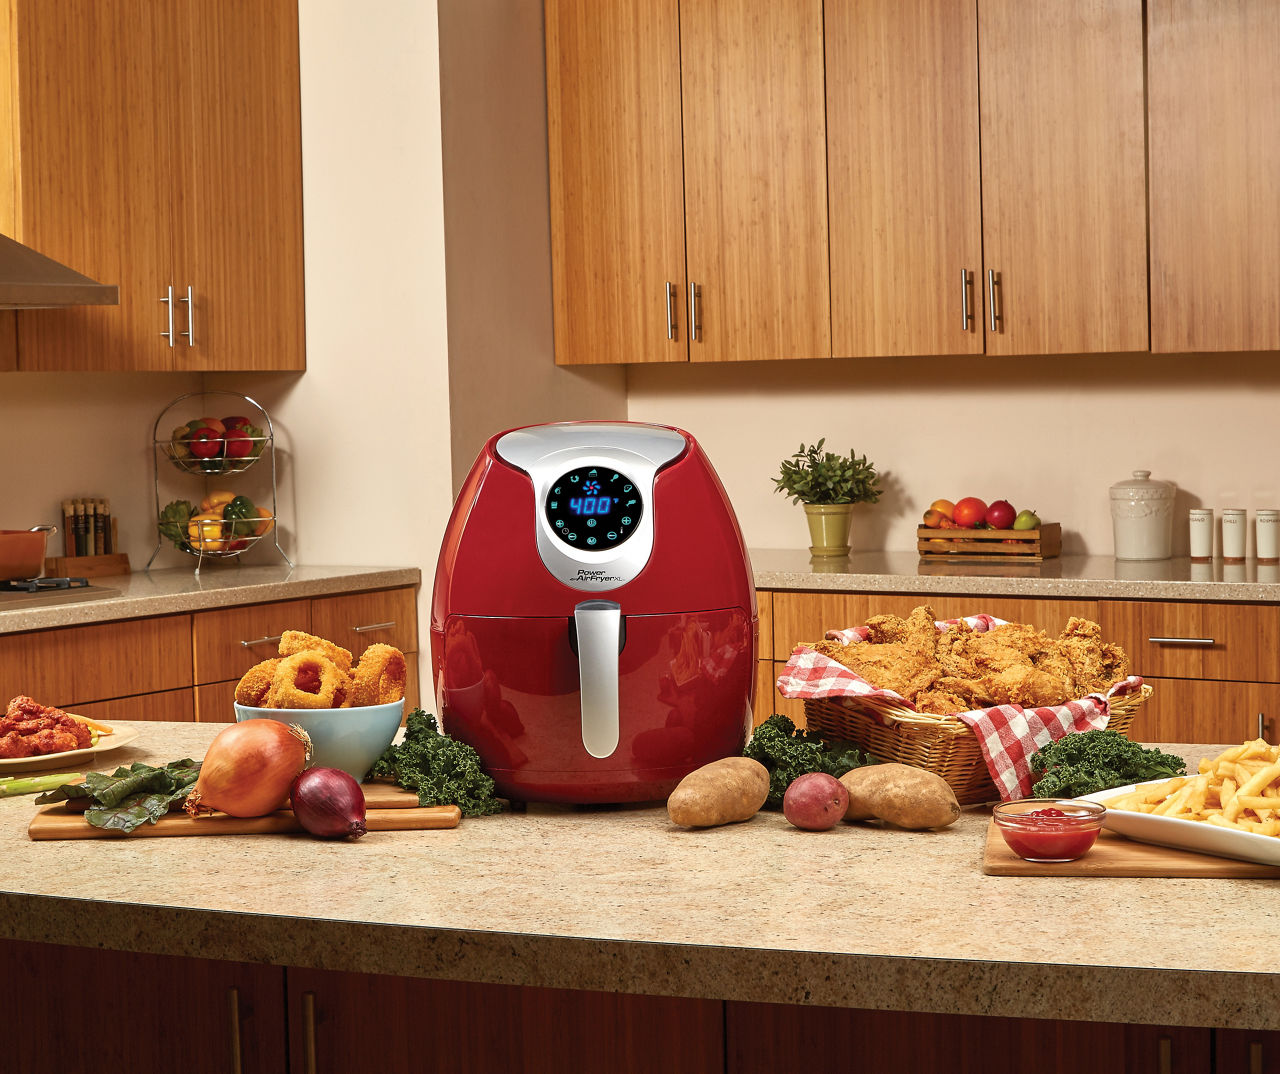 Getting Started with the Power AirFryer XL 